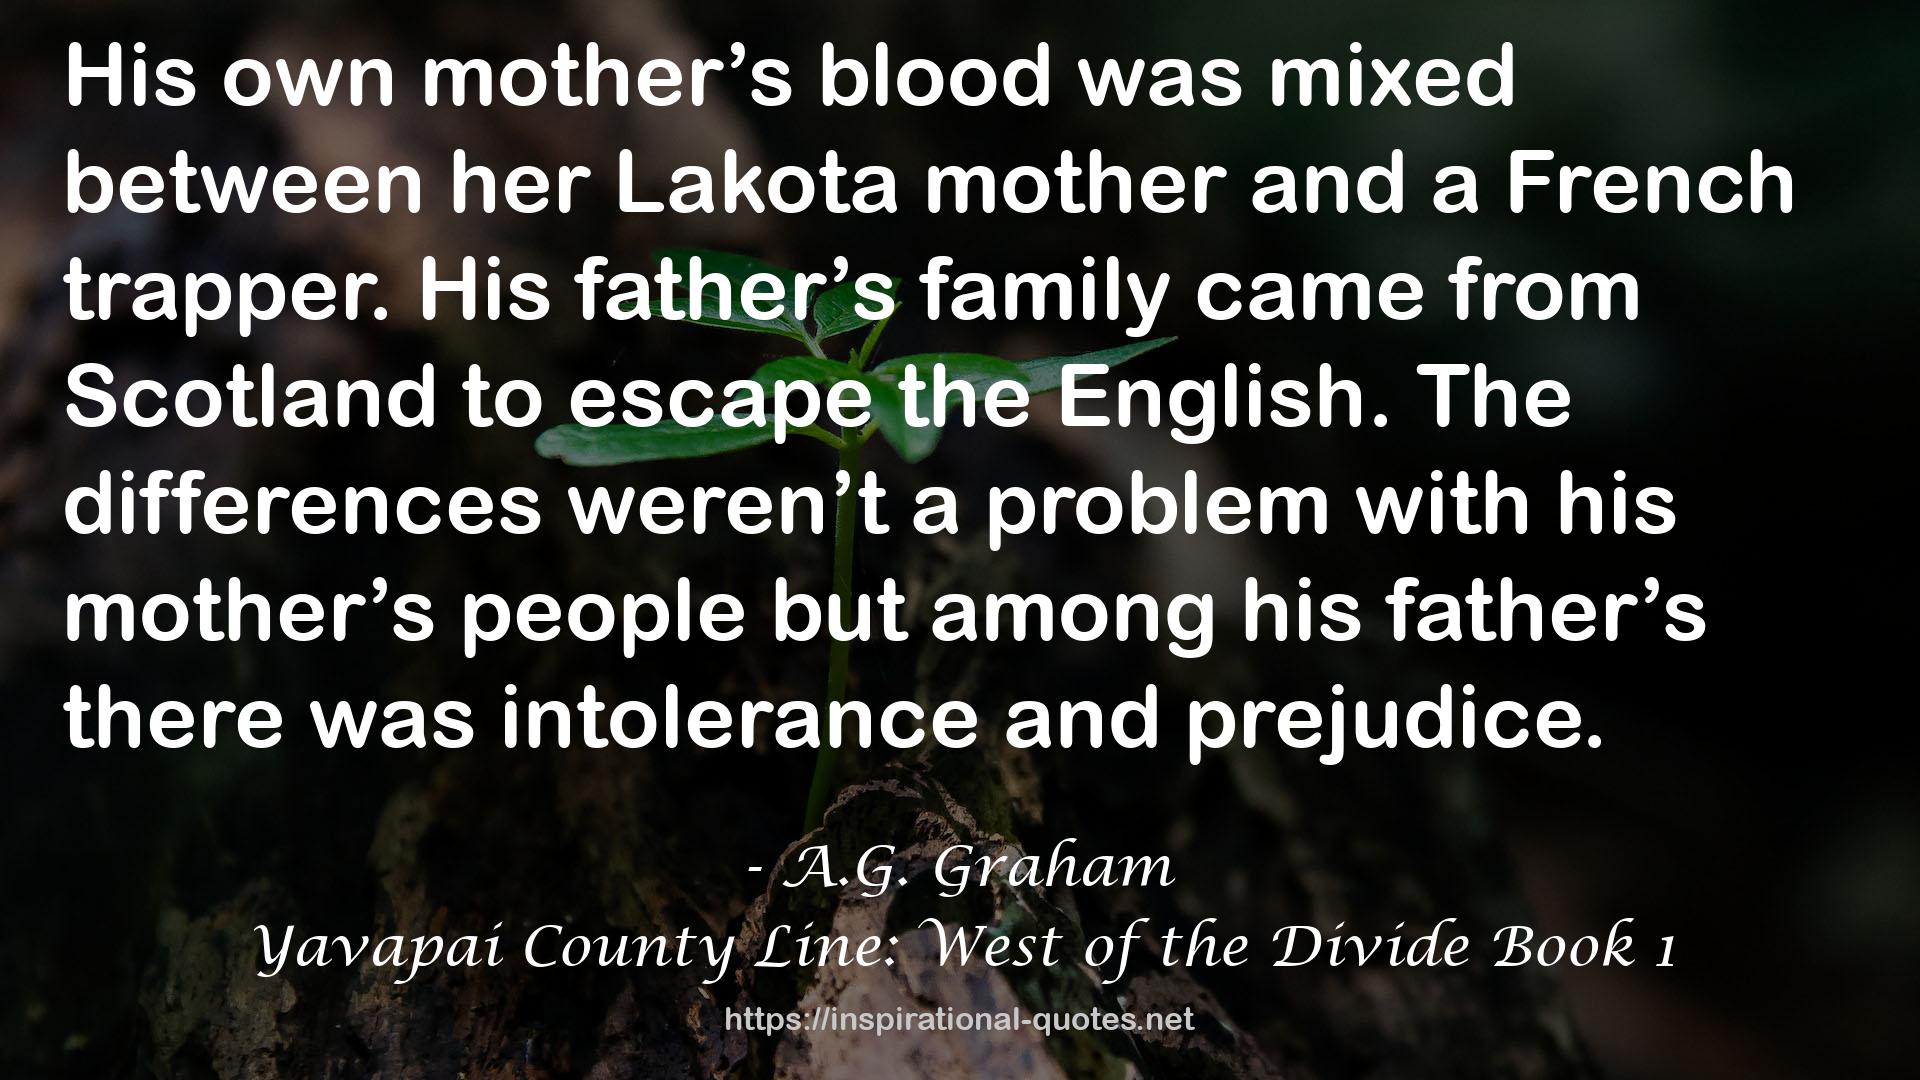 Yavapai County Line: West of the Divide Book 1 QUOTES